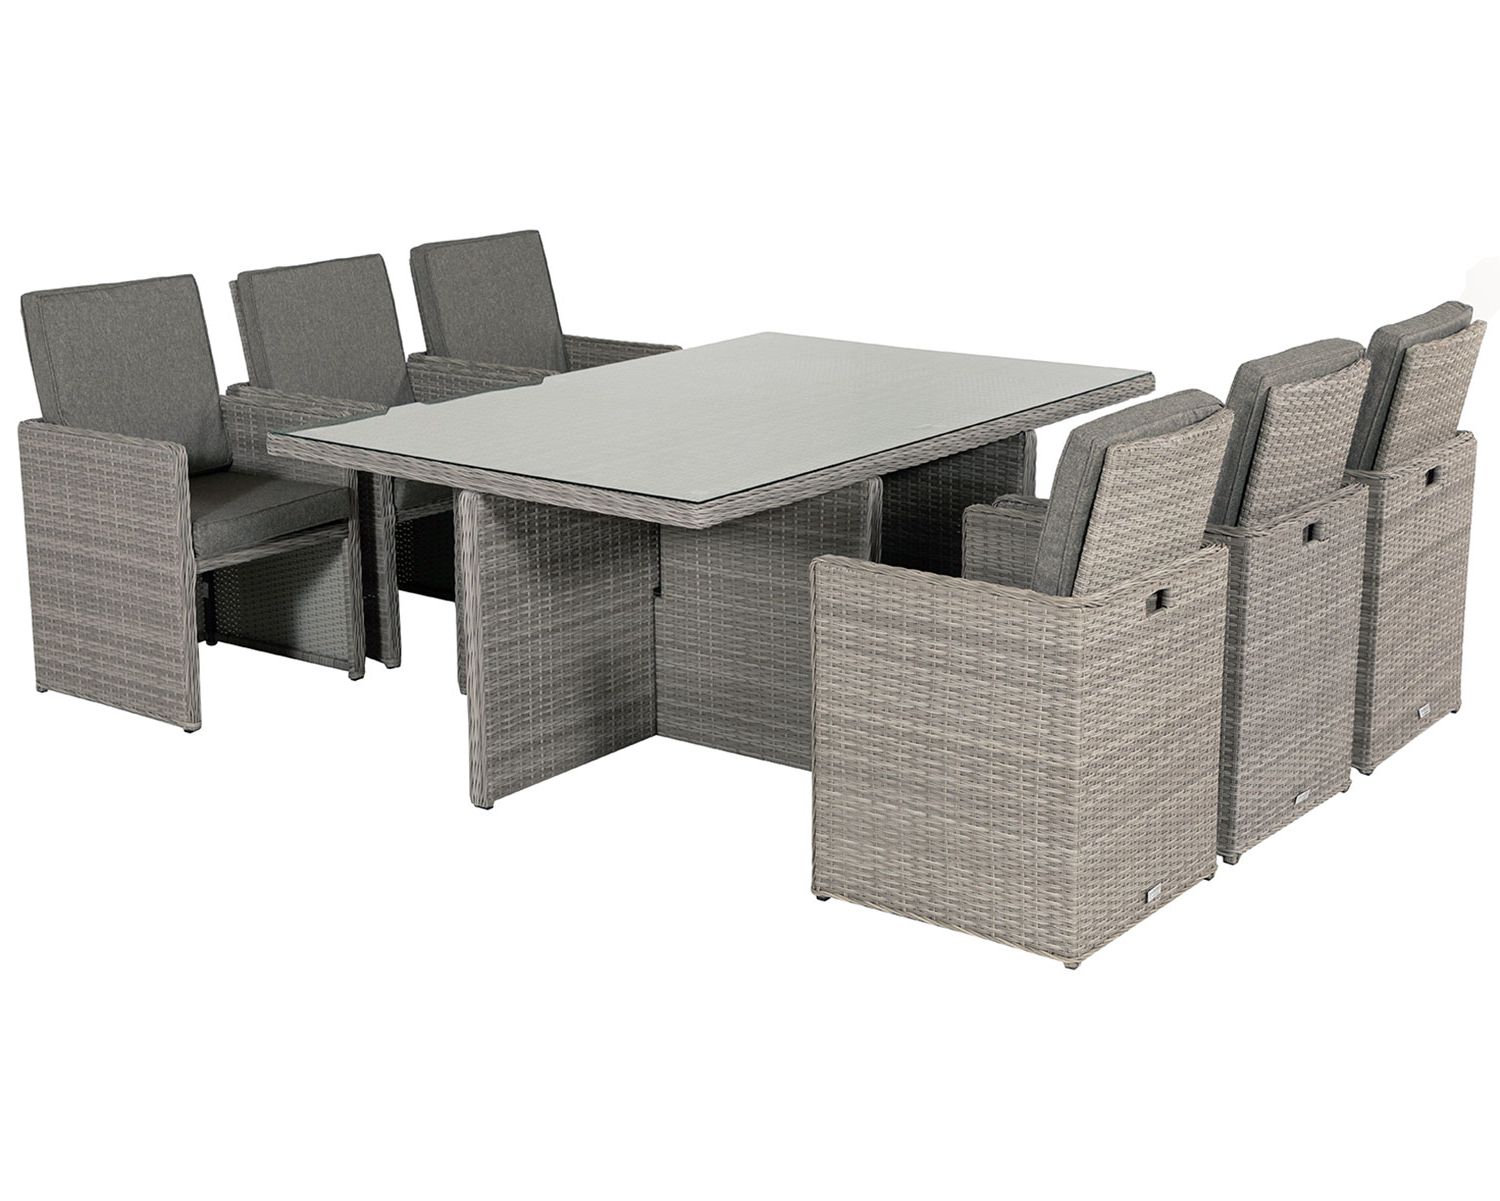 Distressed Gray Wicker Patio Dining Sets Regarding Most Up To Date Grey Rattan Cube Set 6 Seat Garden Furniture Outdoor Patio Ultra Deluxe (View 9 of 15)